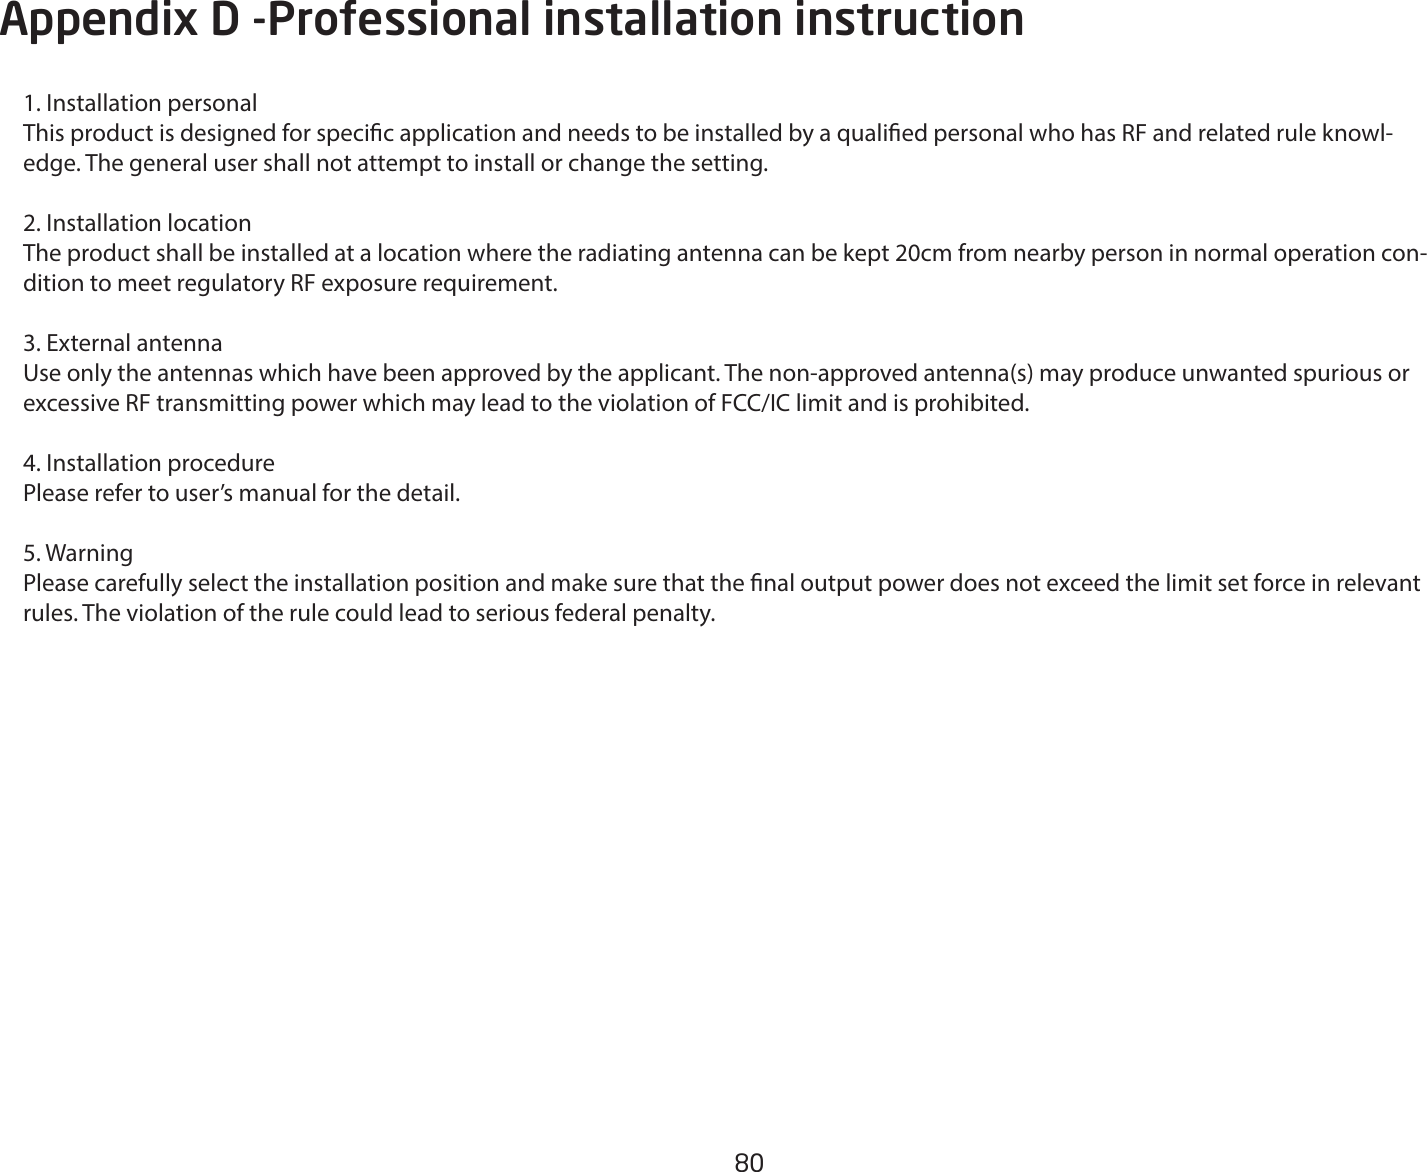 80Appendix D -Professional installation instruction1. Installation personal This product is designed for specic application and needs to be installed by a qualied personal who has RF and related rule knowl-edge. The general user shall not attempt to install or change the setting.2. Installation location The product shall be installed at a location where the radiating antenna can be kept 20cm from nearby person in normal operation con-dition to meet regulatory RF exposure requirement.3. External antenna Use only the antennas which have been approved by the applicant. The non-approved antenna(s) may produce unwanted spurious or excessiveRFtransmittingpowerwhichmayleadtotheviolationofFCC/IClimitandisprohibited.4. Installation procedure Please refer to user’s manual for the detail.5. Warning Please carefully select the installation position and make sure that the nal output power does not exceed the limit set force in relevant rules. The violation of the rule could lead to serious federal penalty.